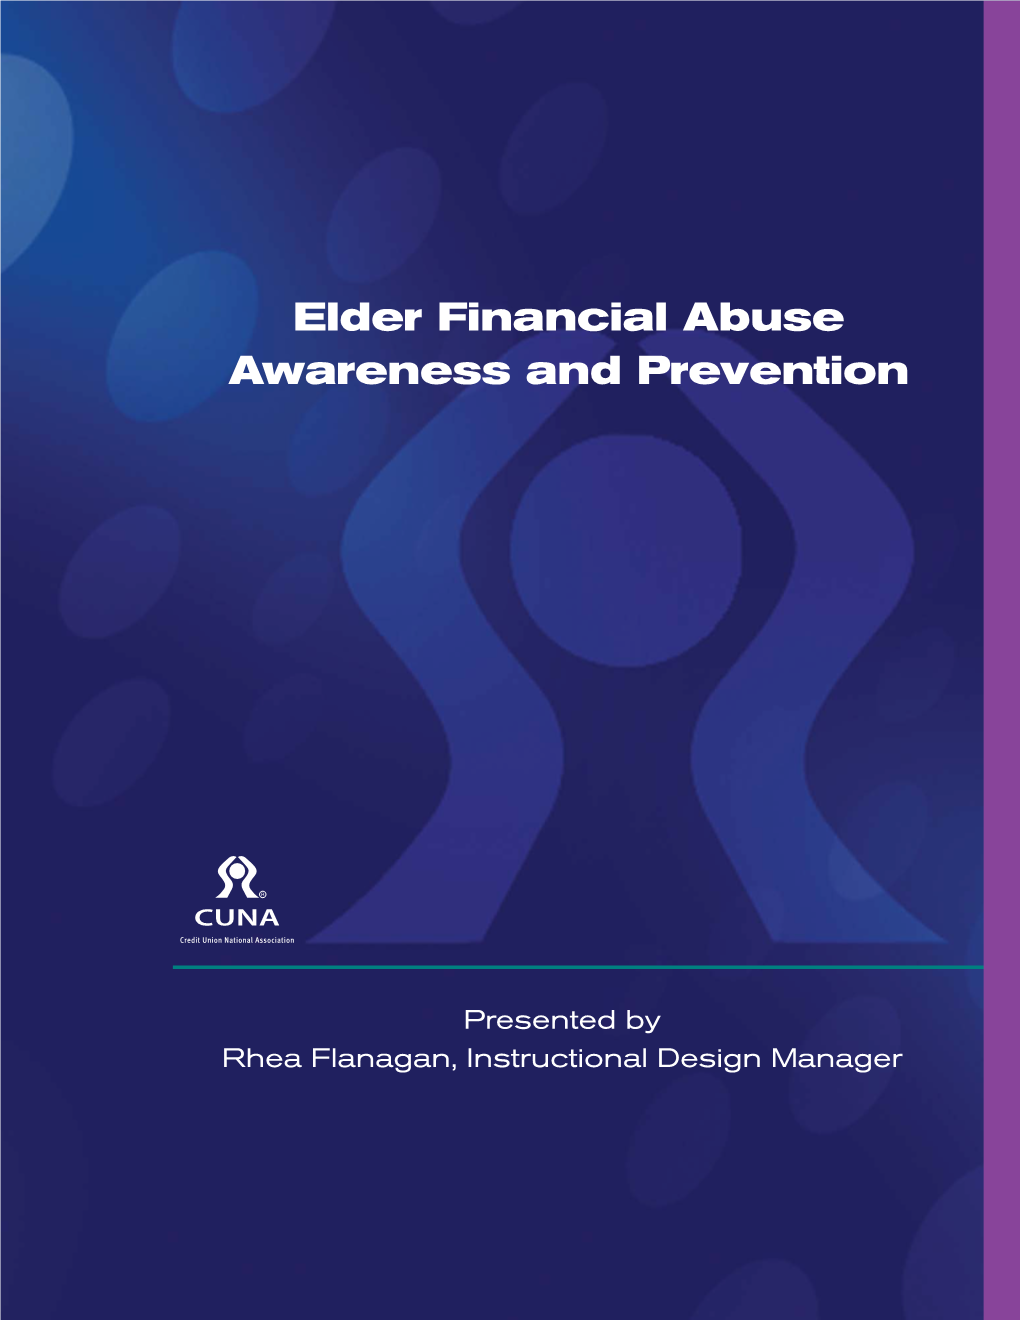 Elder Financial Abuse Awareness and Prevention